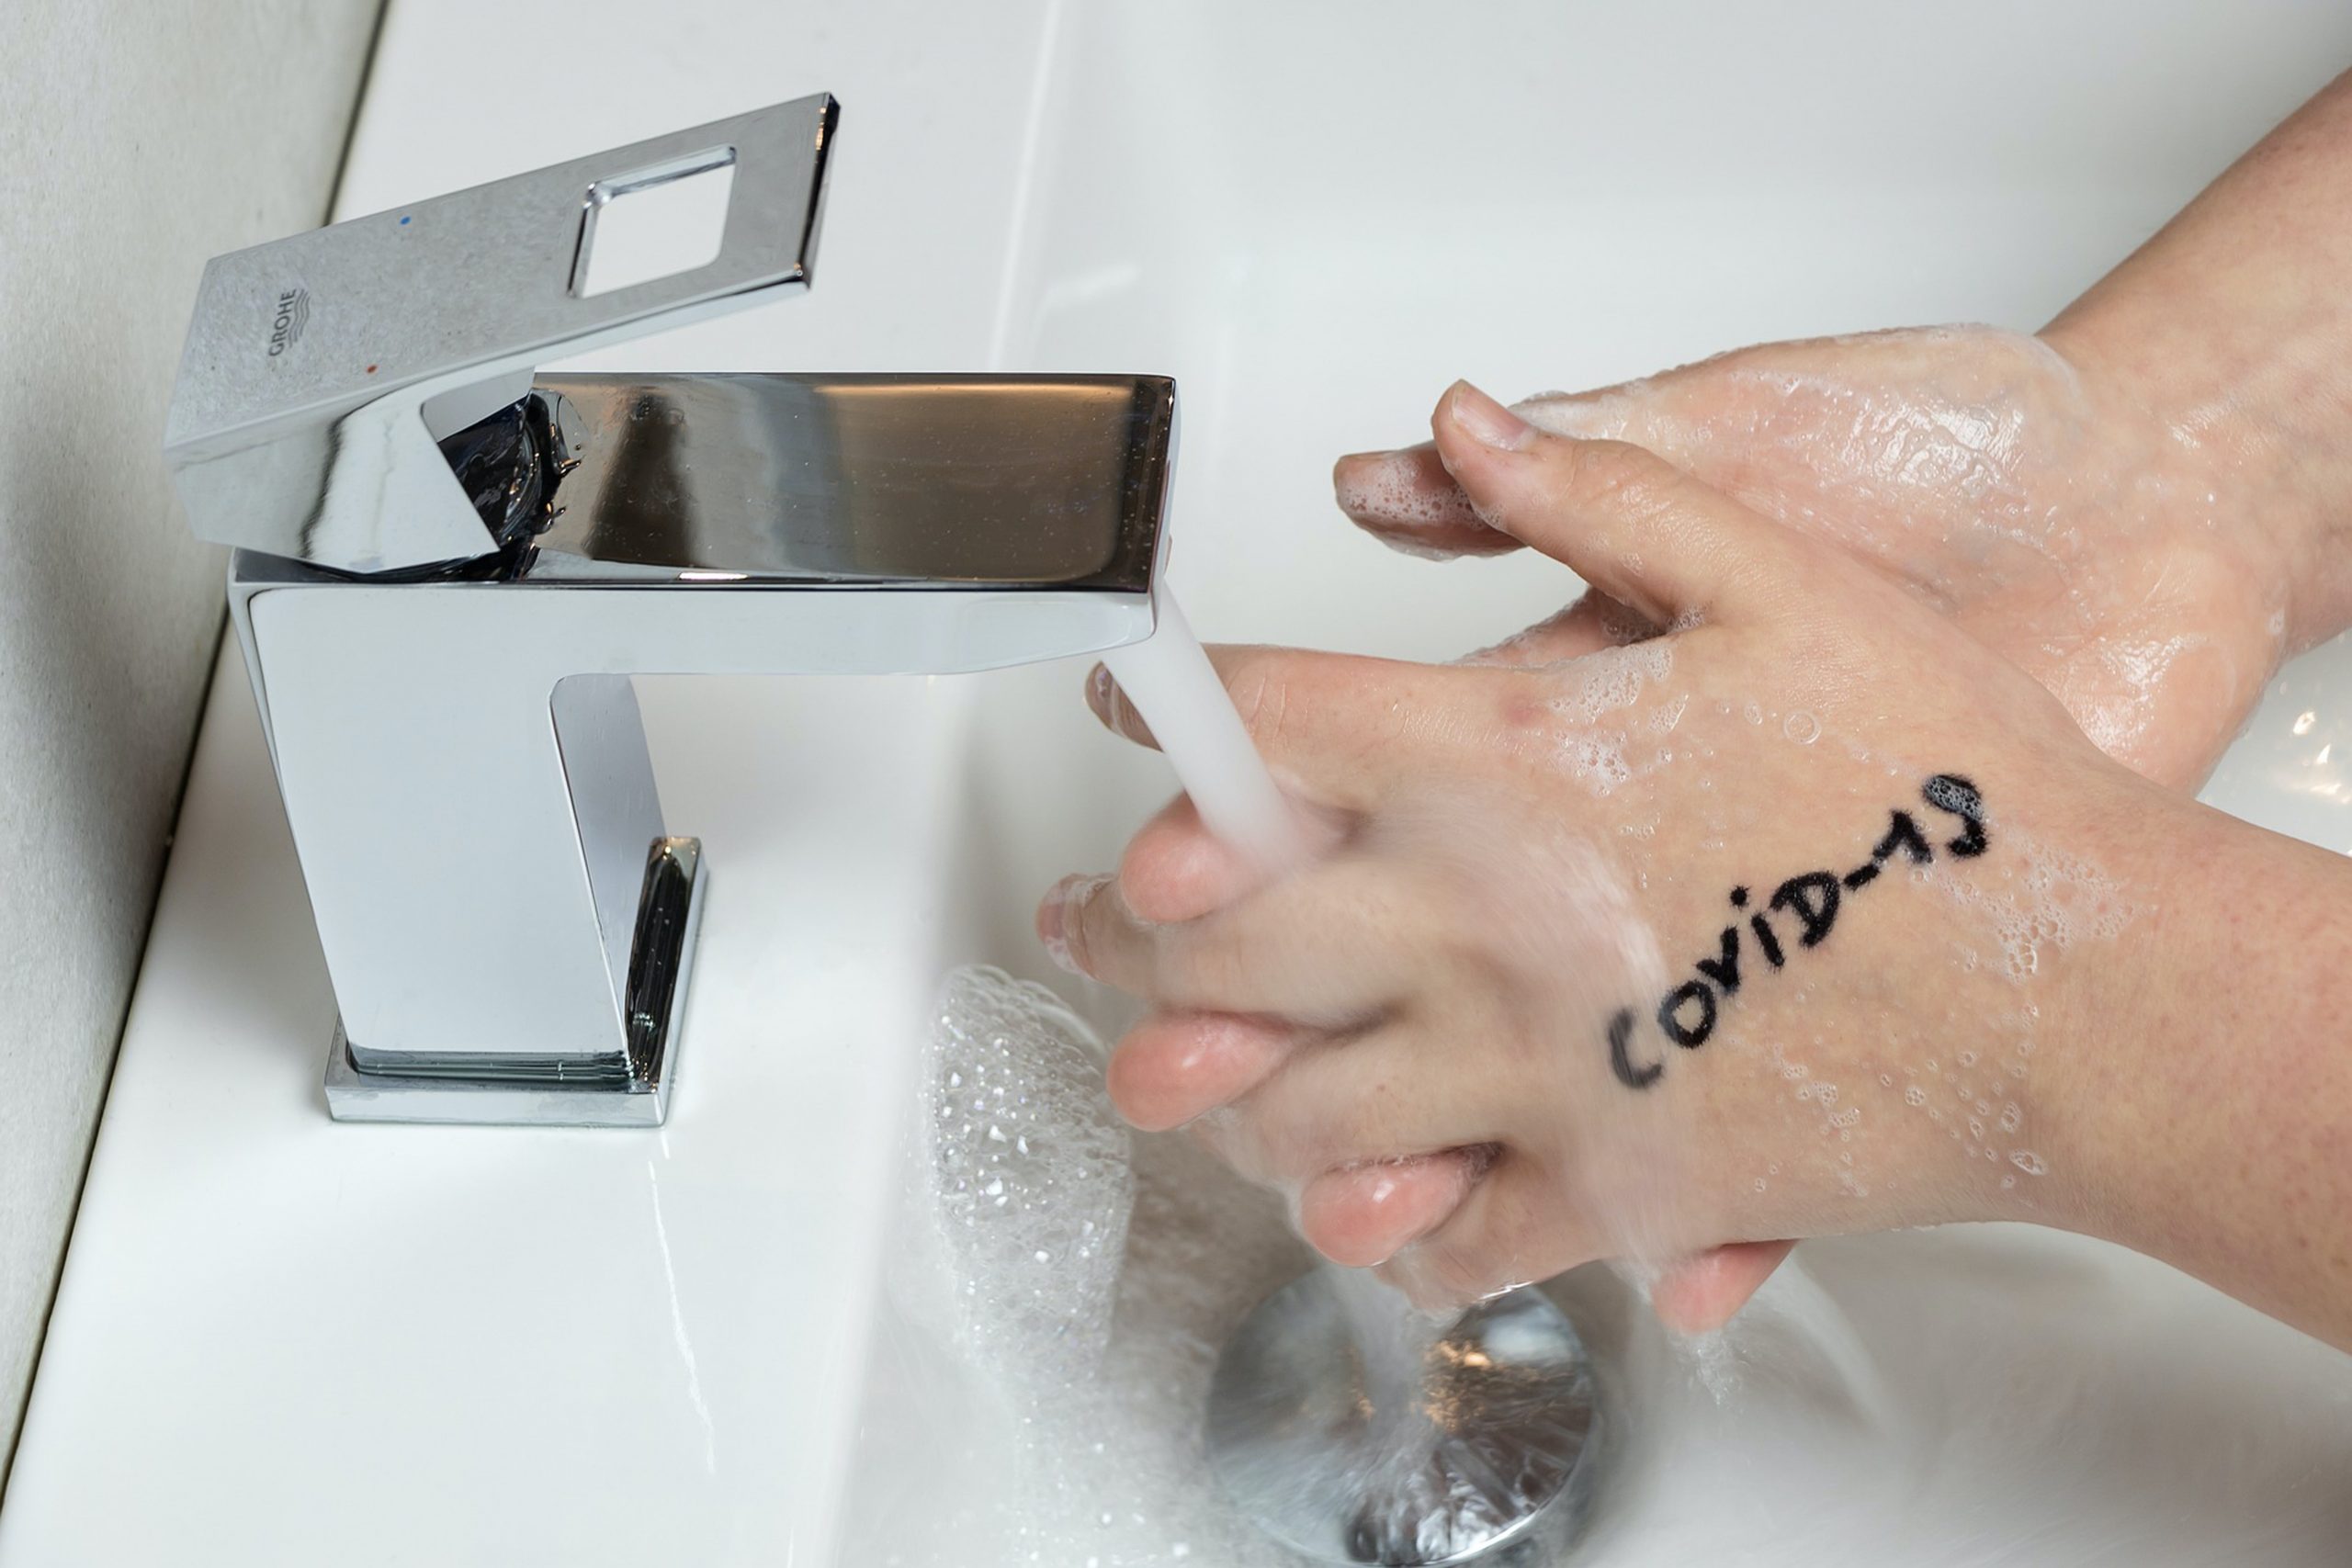 Someone washing hands with COVID-19 written in marker on top hand demonstrating how COVID hand washing has emerged.